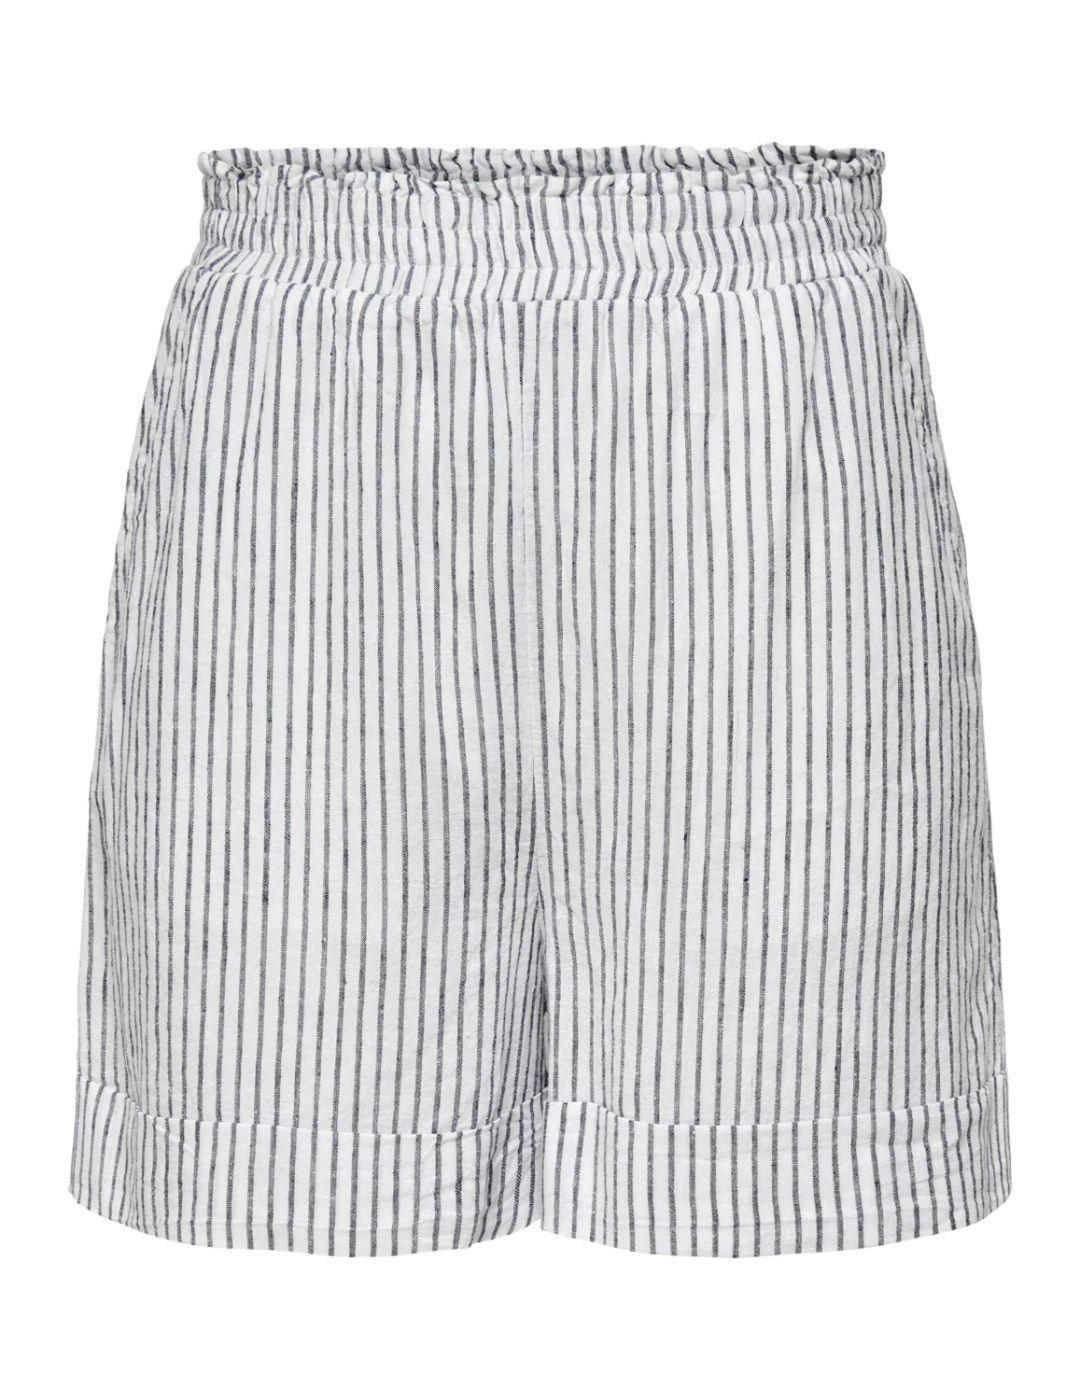 Short Only Linette blanco y marino para mujer-a